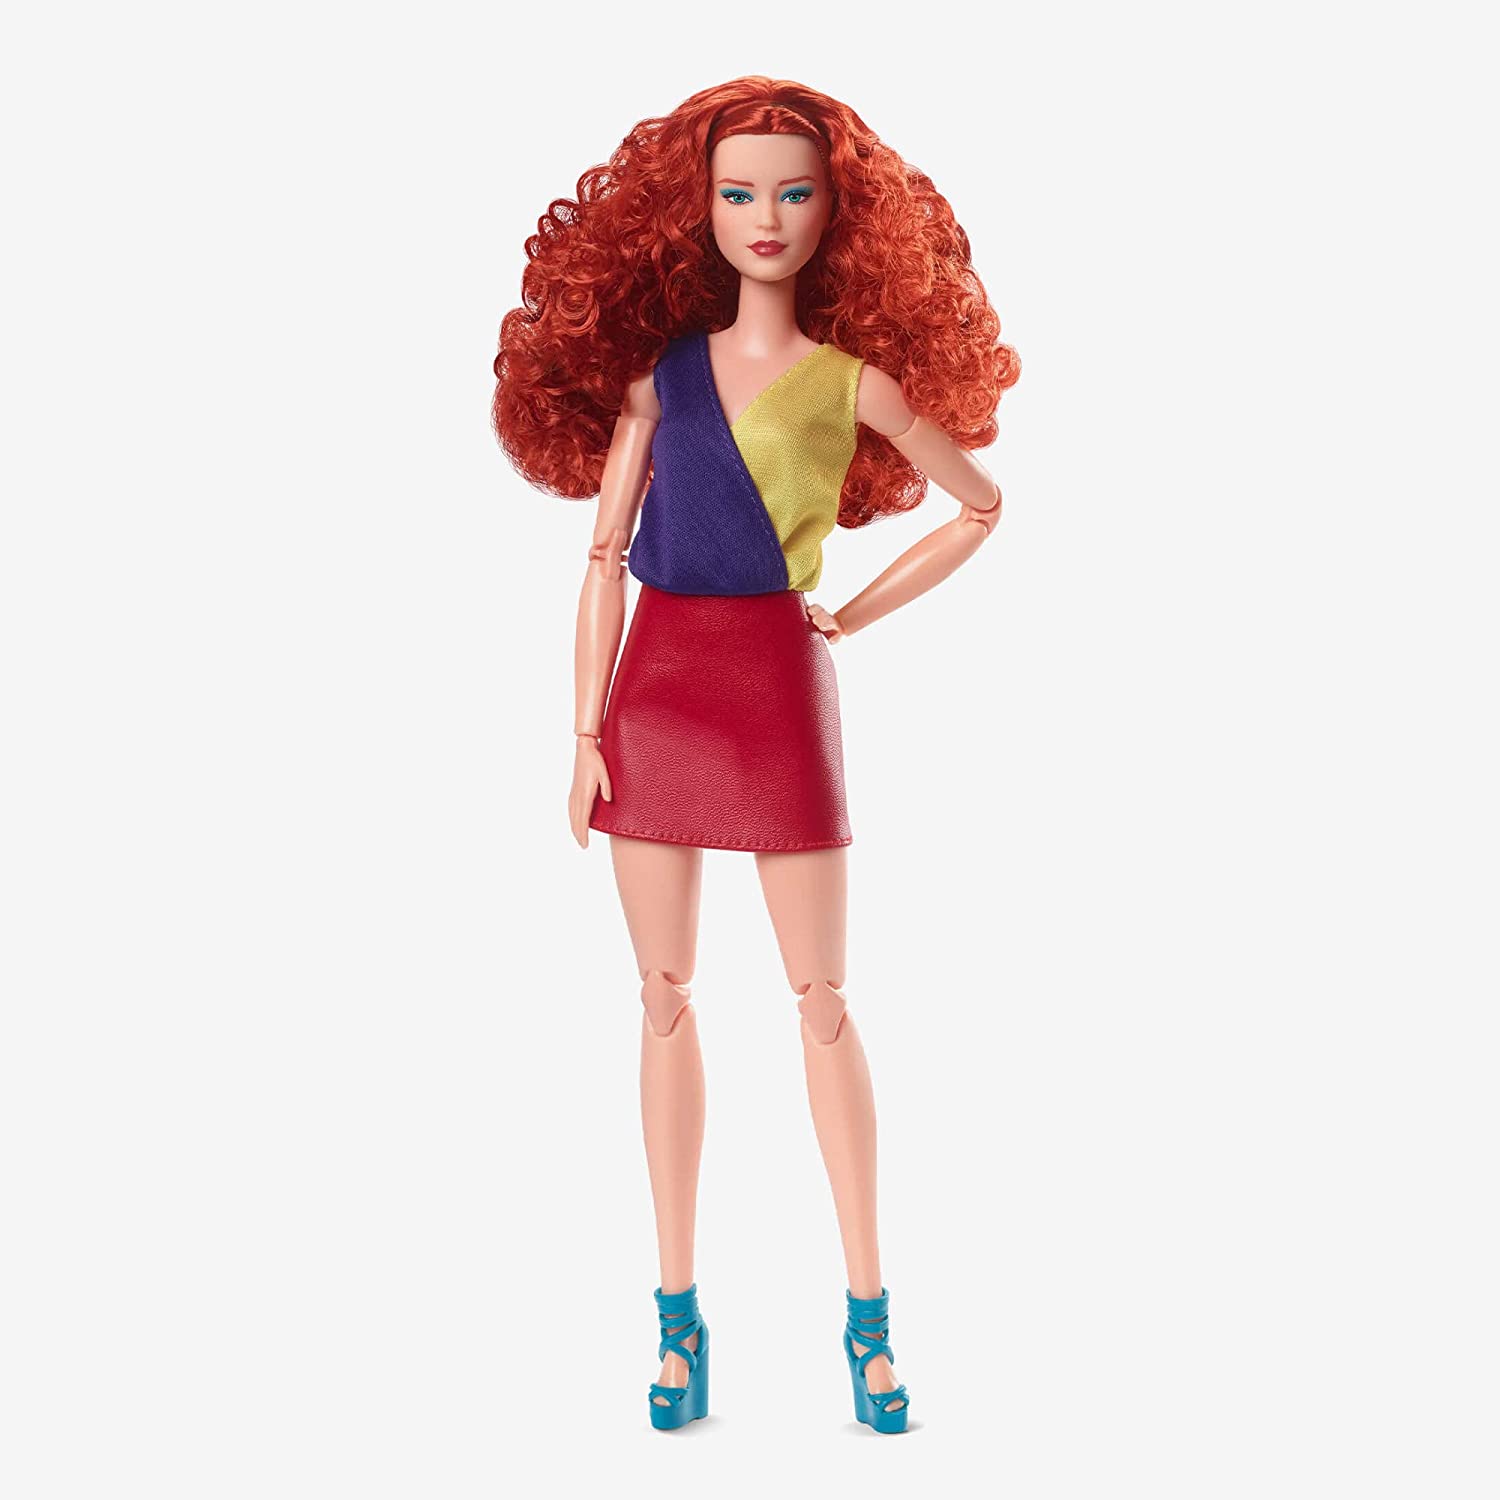 First collection of mixed race Barbie dolls hits the UK